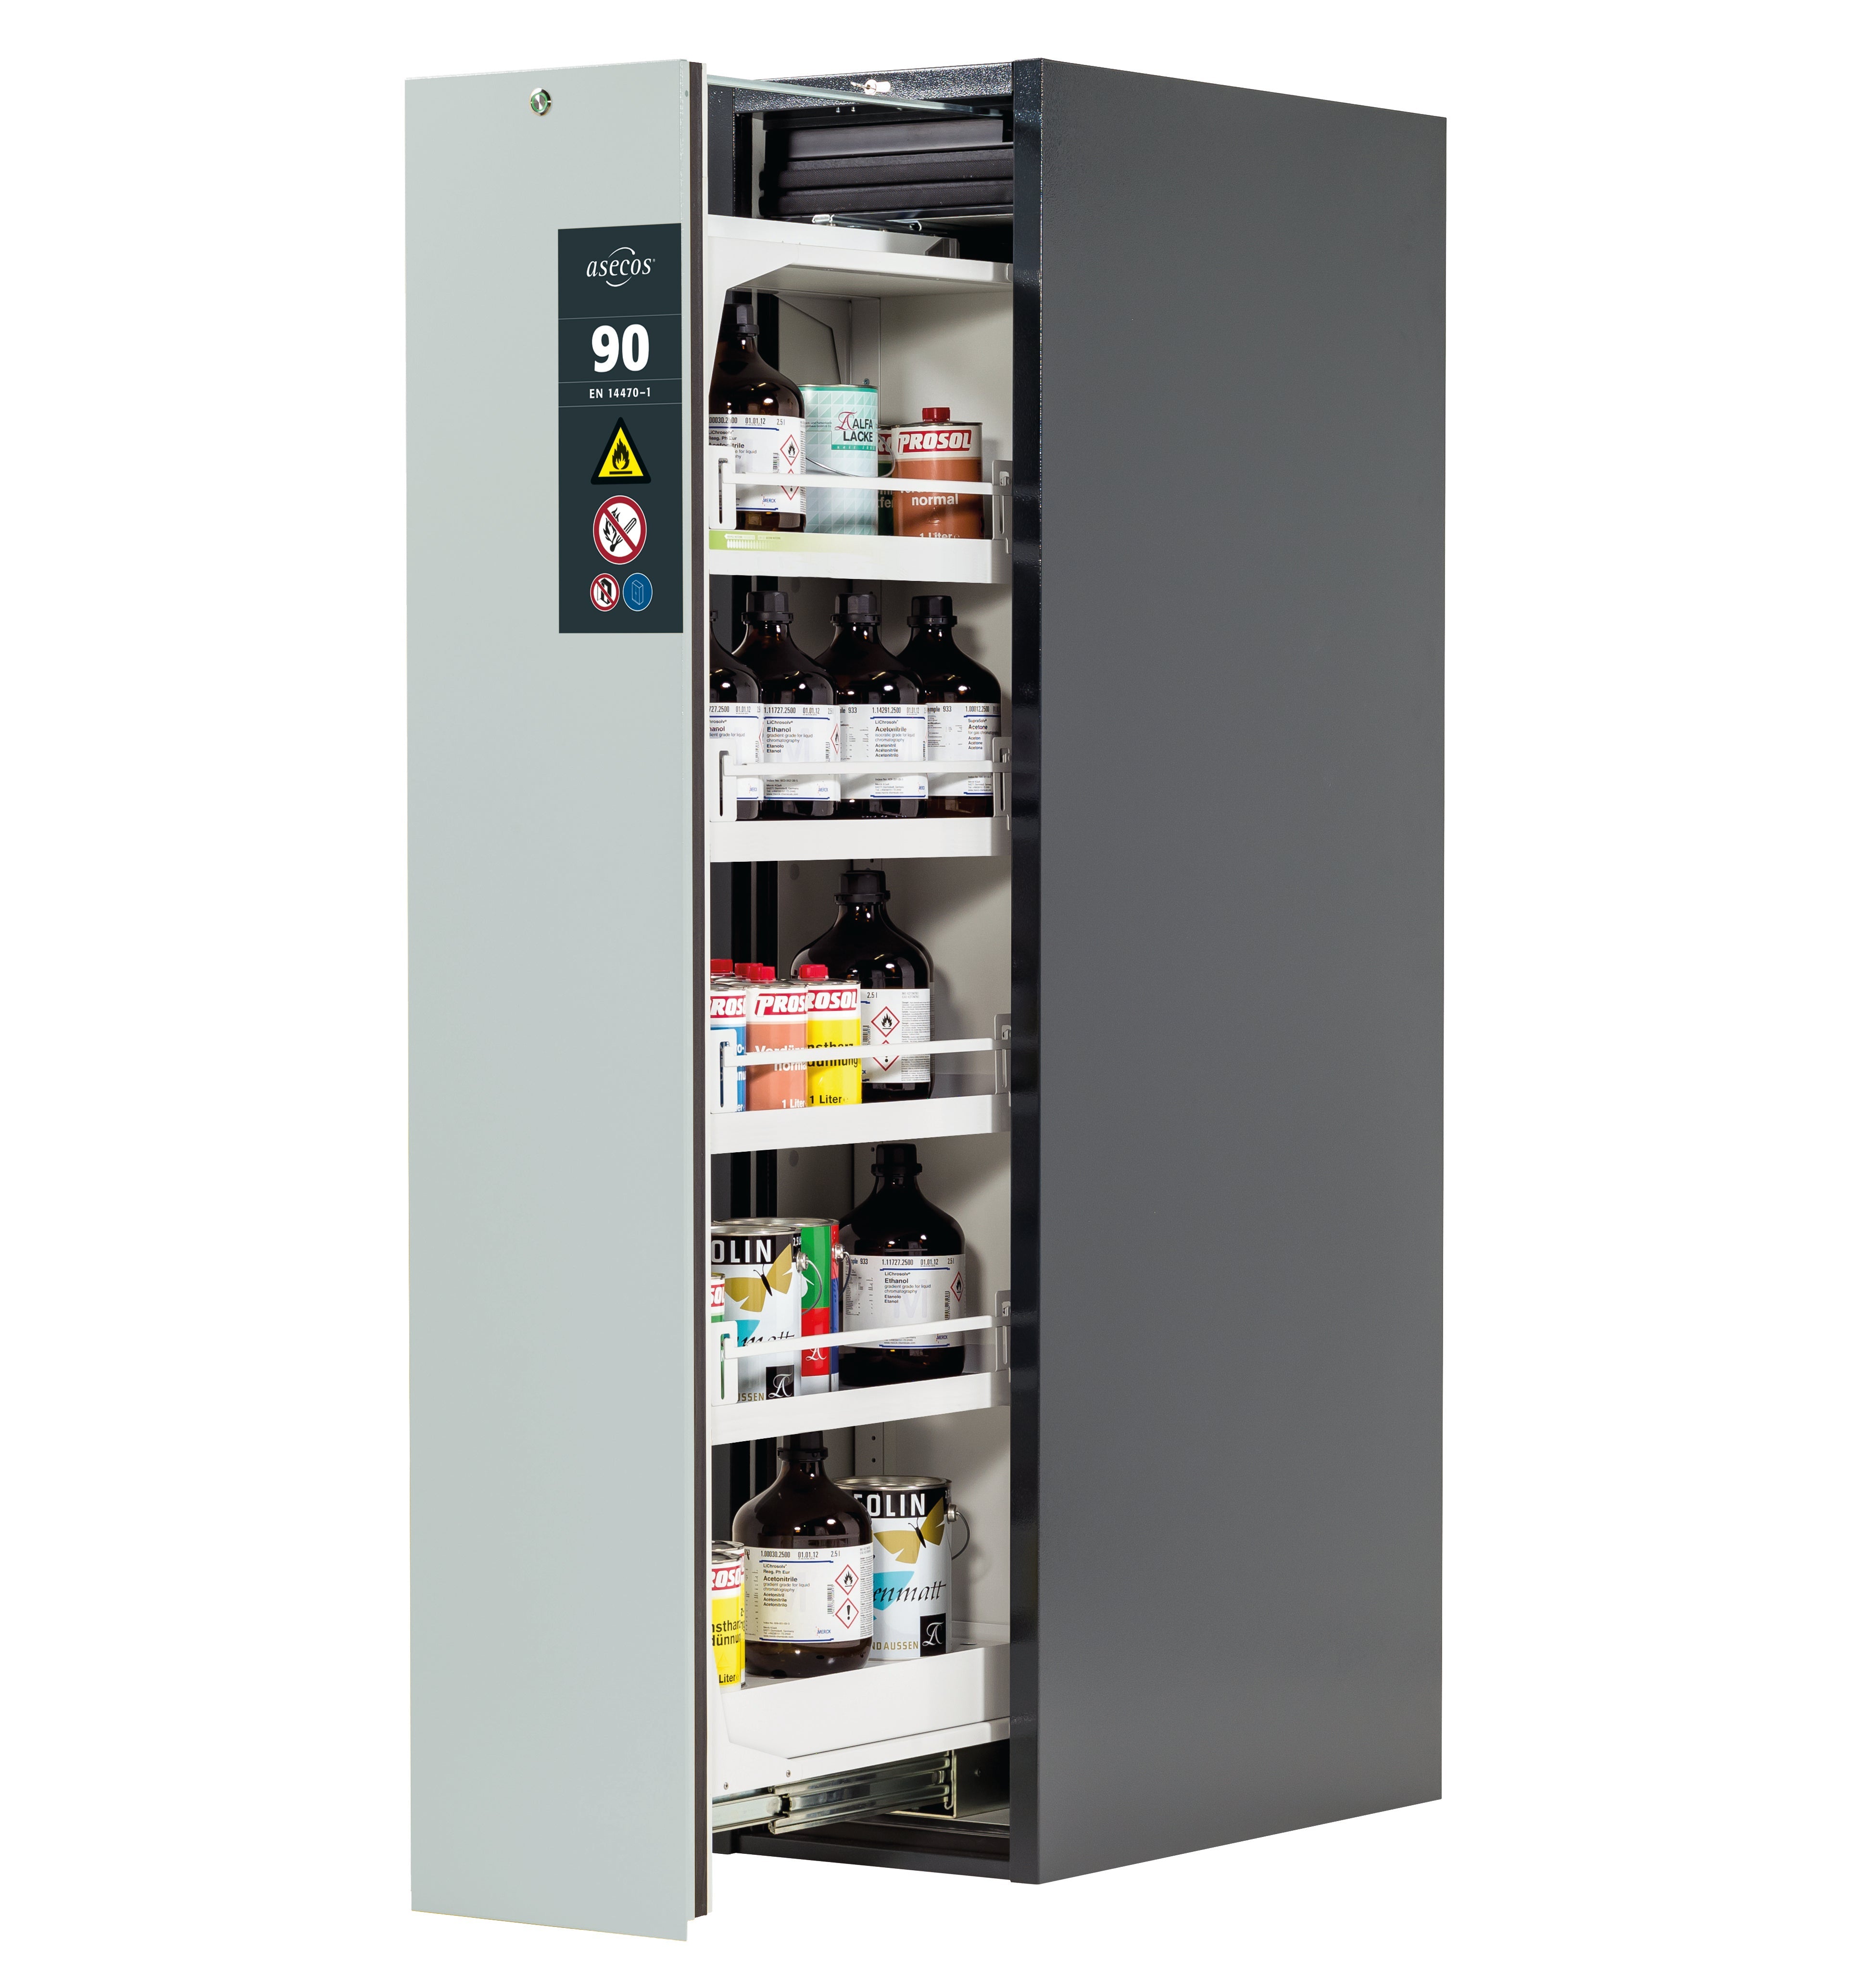 Type 90 safety cabinet V-MOVE-90 model V90.196.045.VDAC:0013 in light gray RAL 7035 with 4x standard tray base (sheet steel)